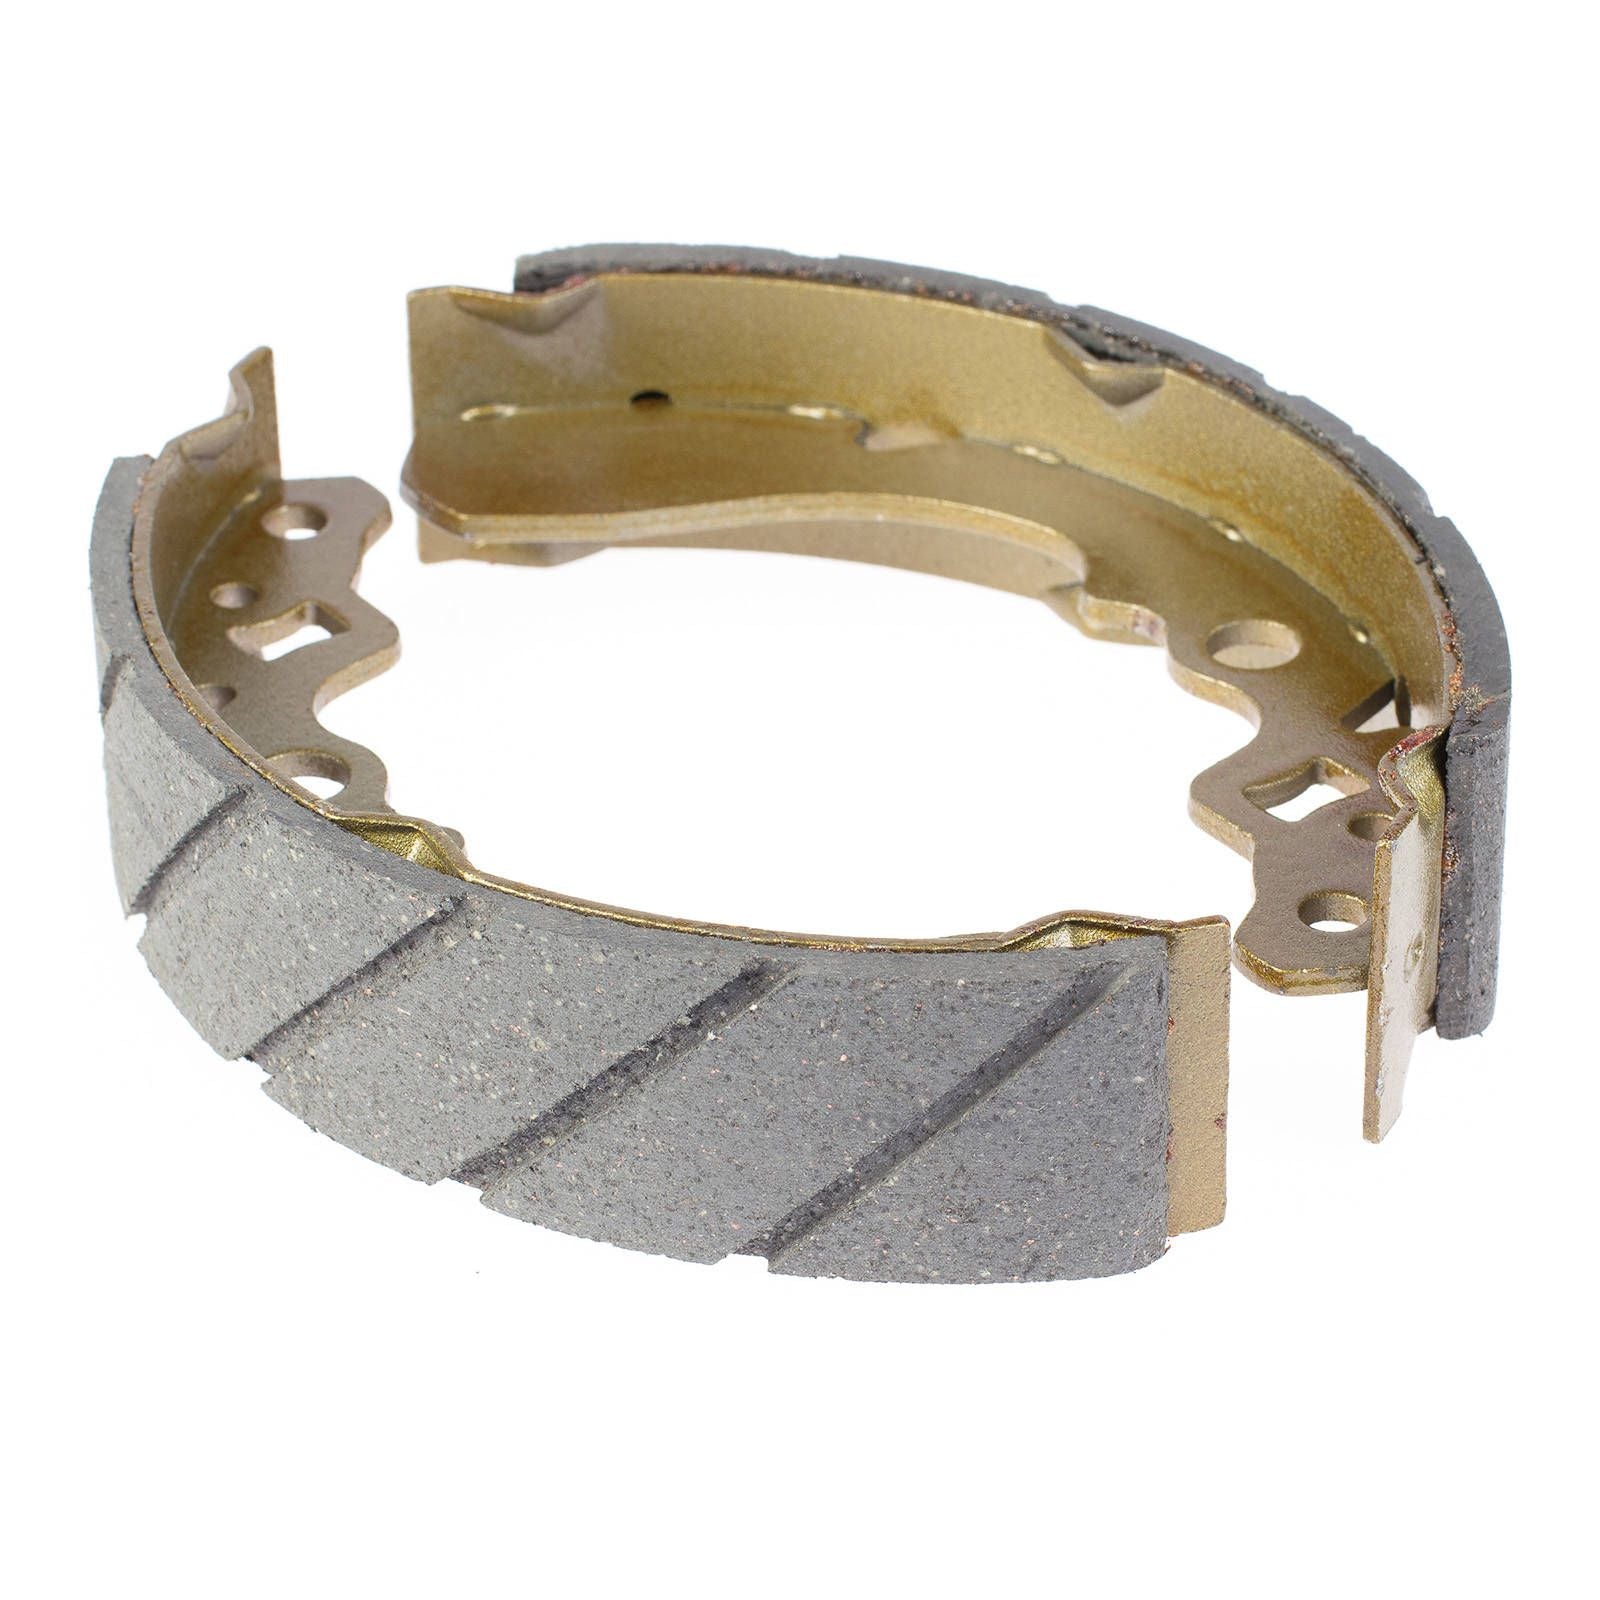 New WHITES Motorcycle Brake Shoes - Water Groove #WPBS41075